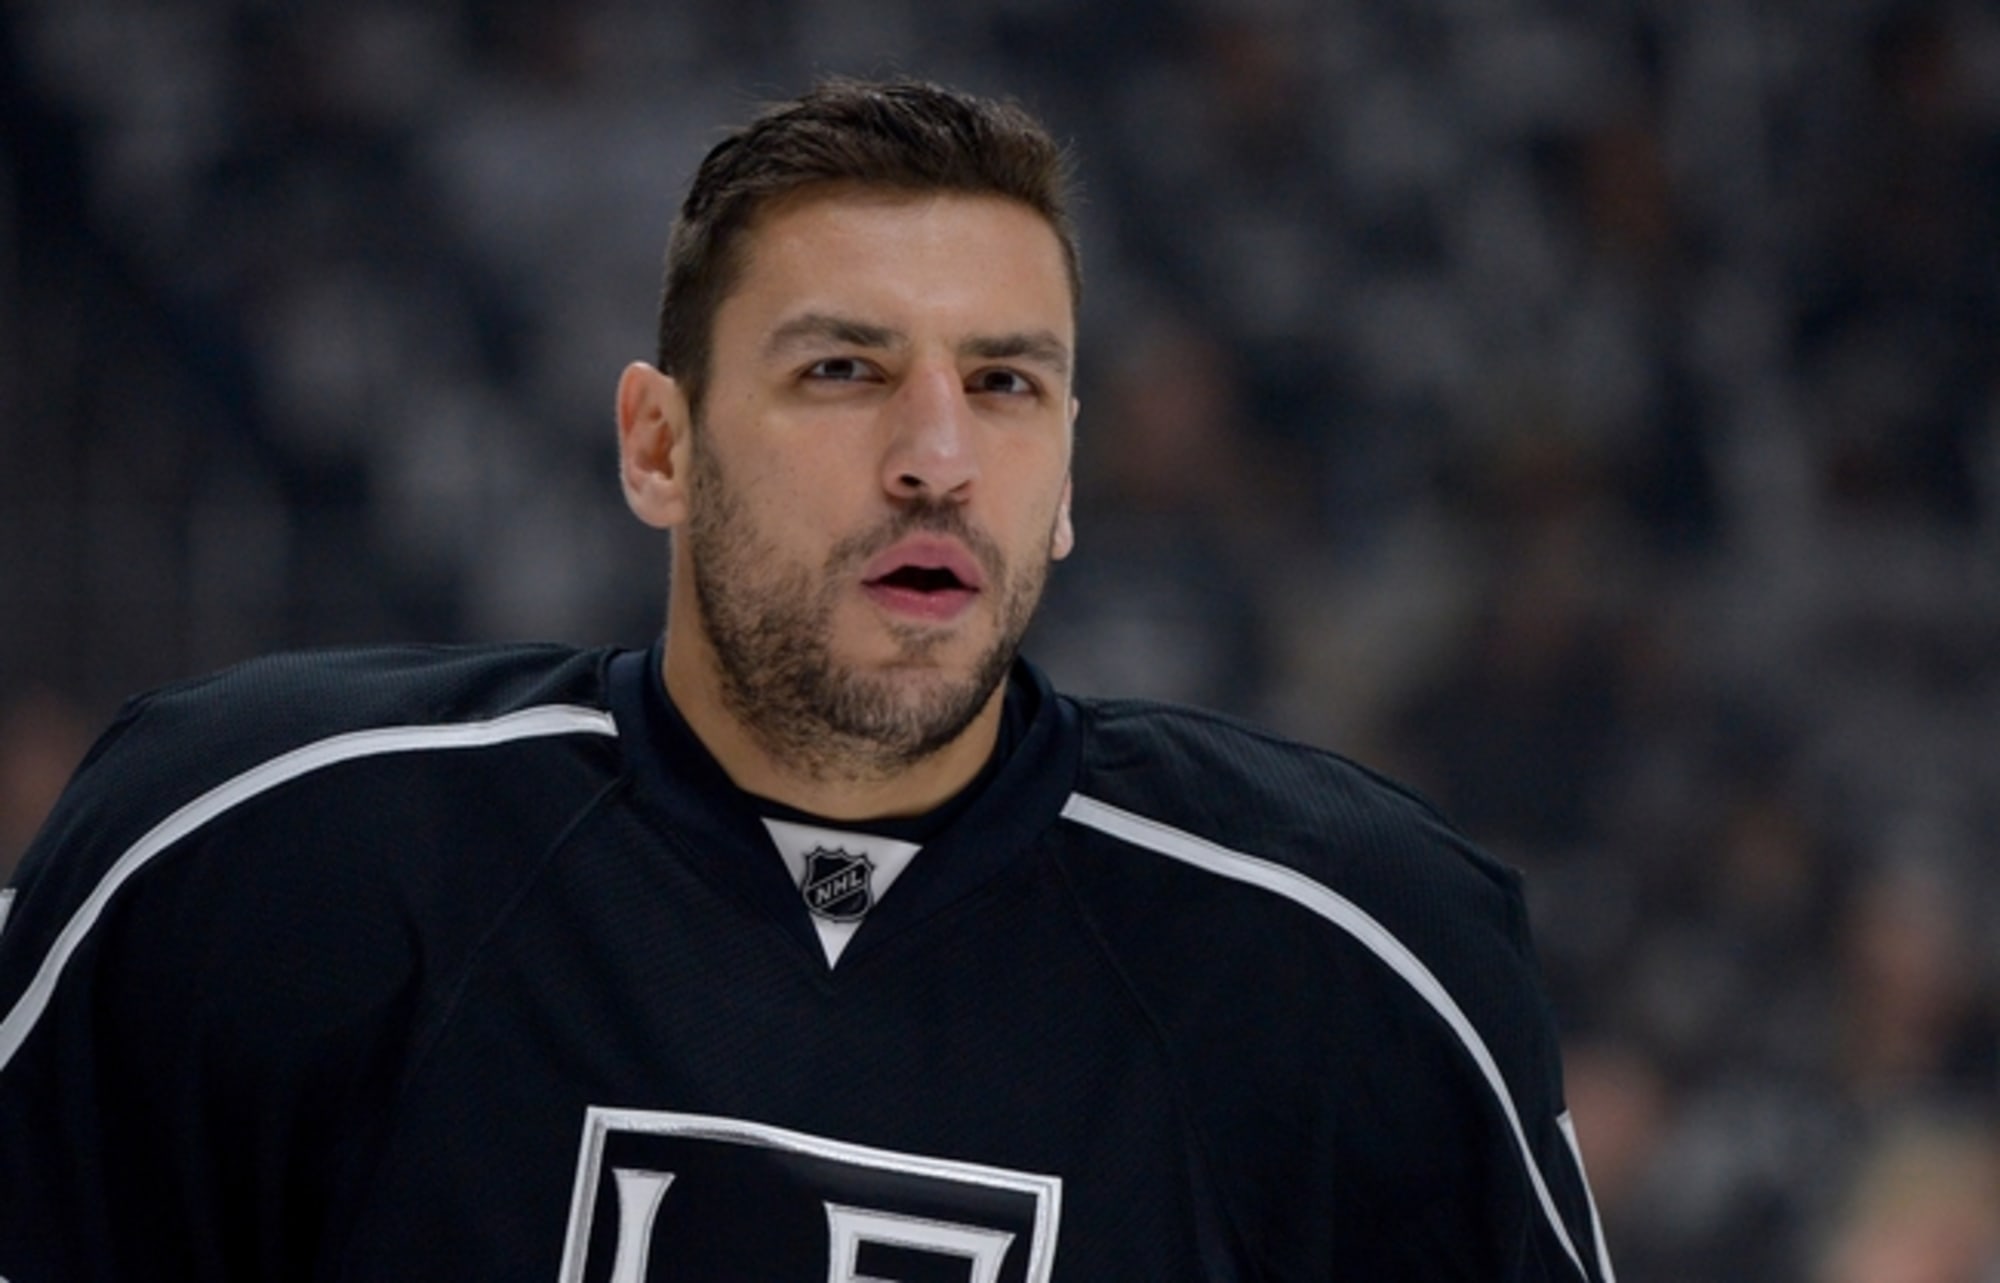 Milan Lucic re-joining Boston Bruins on one-year deal